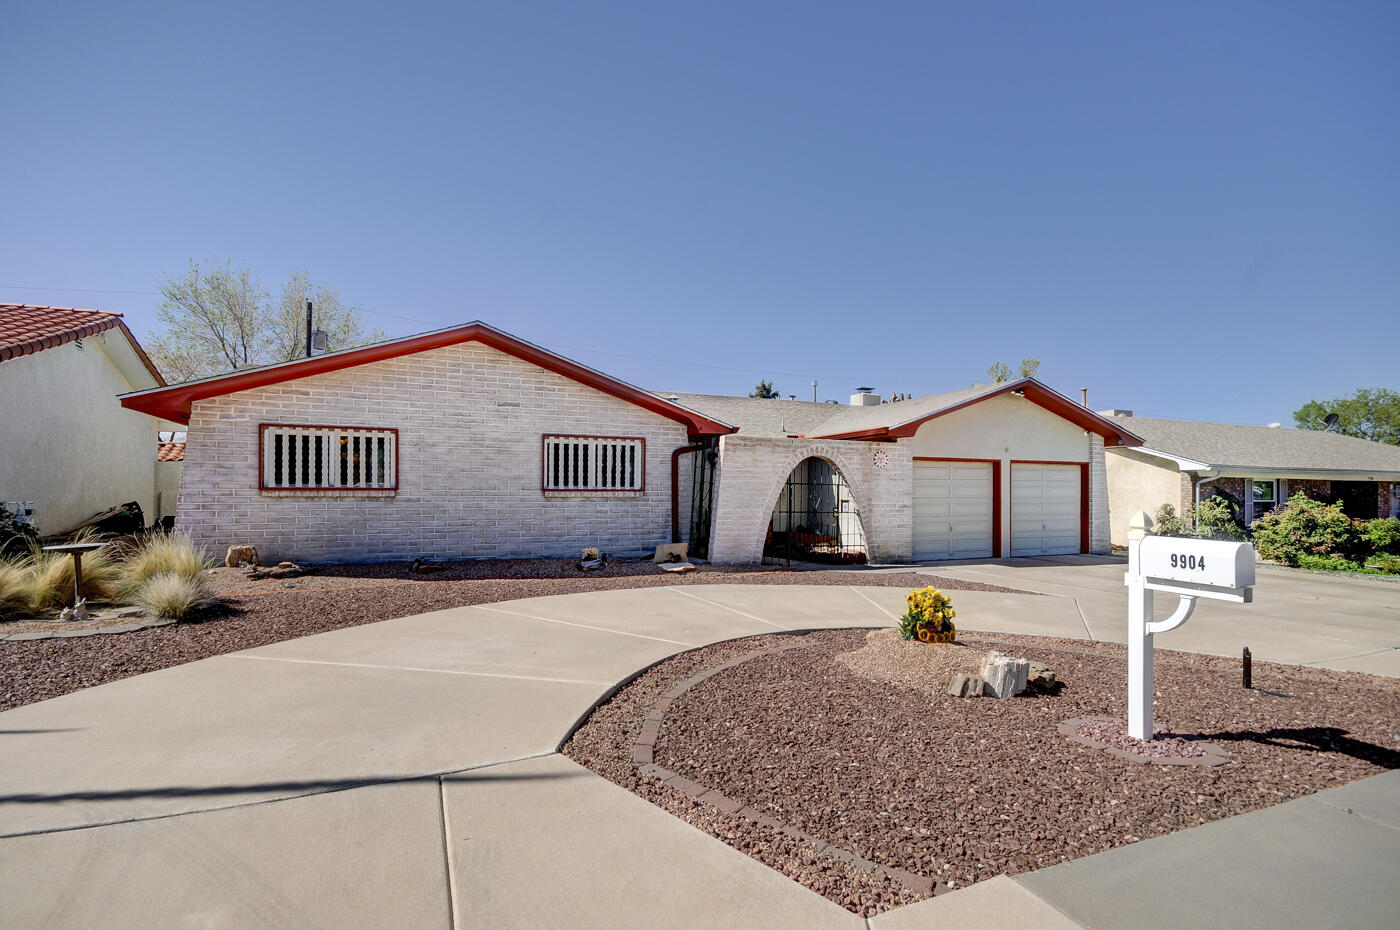 9904 Dorothy Place NE, Albuquerque, New Mexico 87111, 3 Bedrooms Bedrooms, ,2 BathroomsBathrooms,Residential,For Sale,9904 Dorothy Place NE,1061373